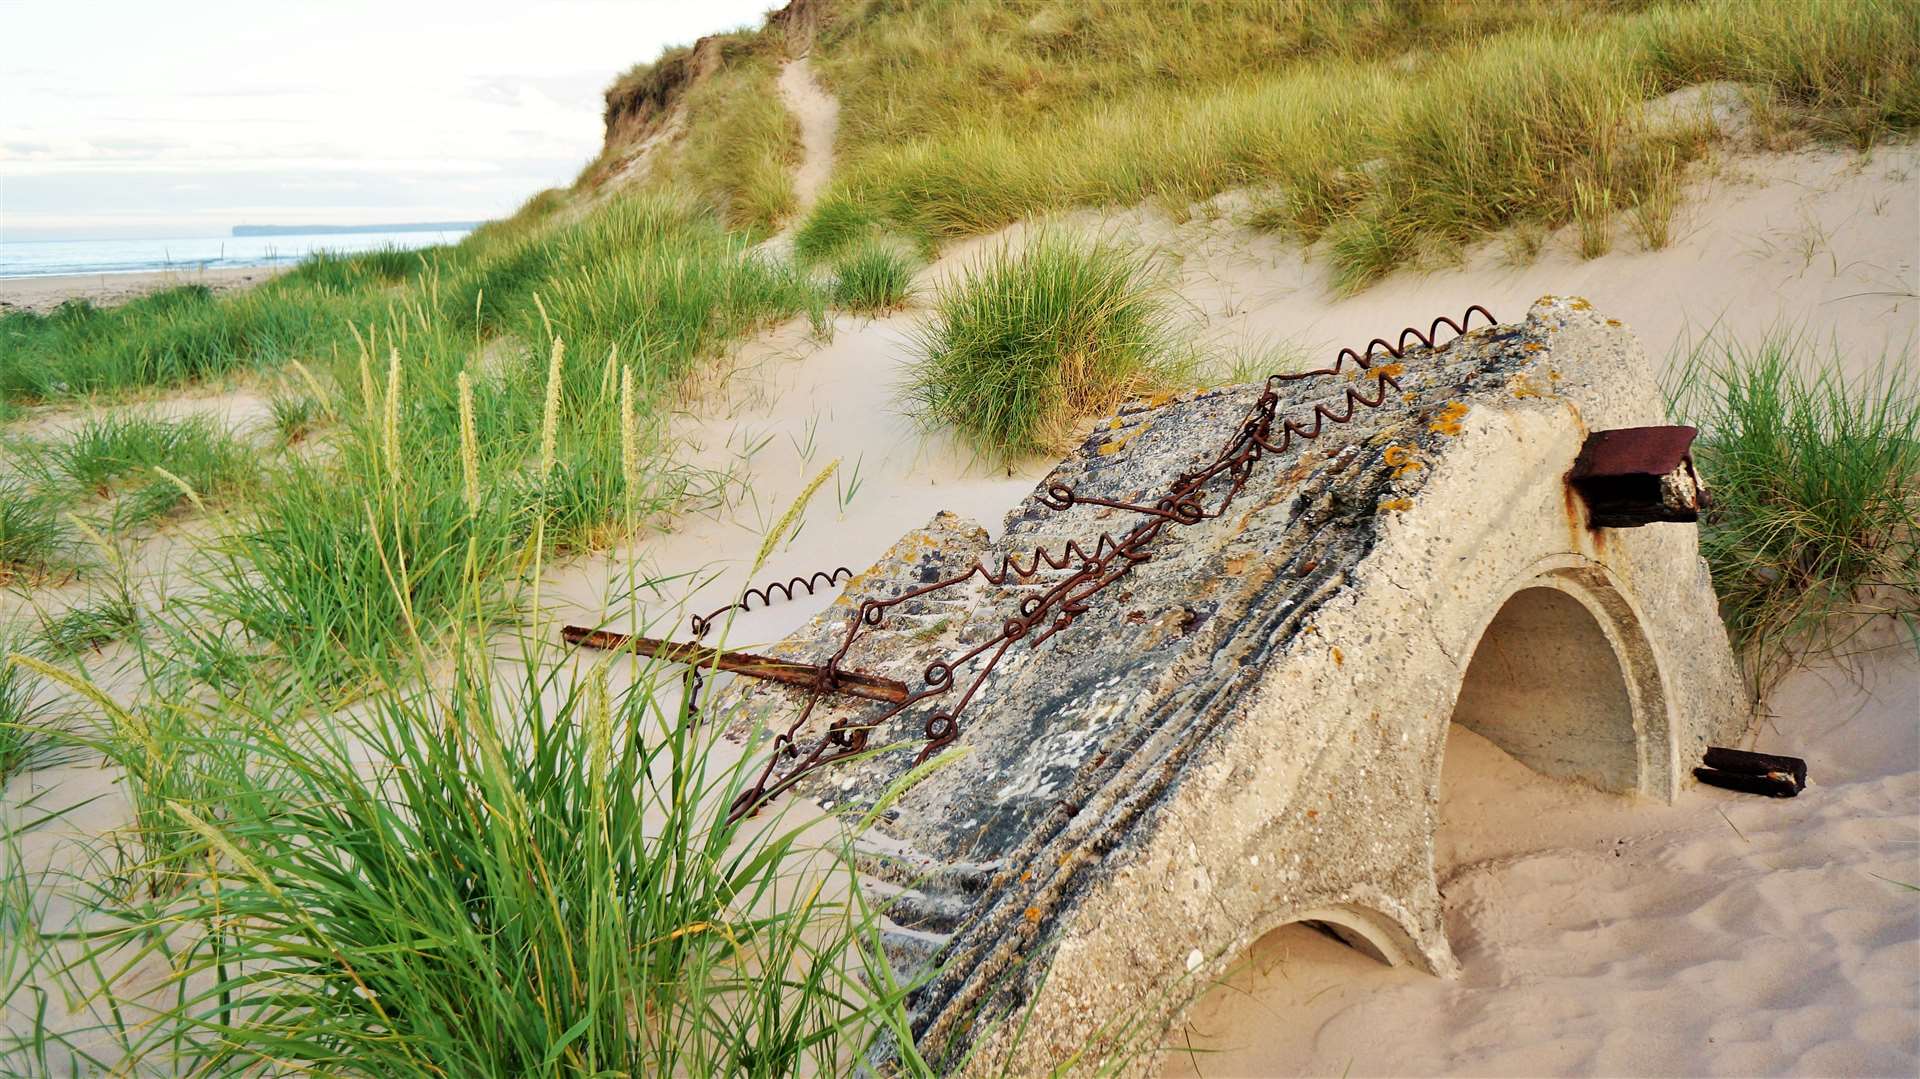 The beaches at Sinclair's Bay are littered with remnants from World War Two. The bay was heavily fortified and used to test experimental bombs called Highballs in 1943. Picture: DGS